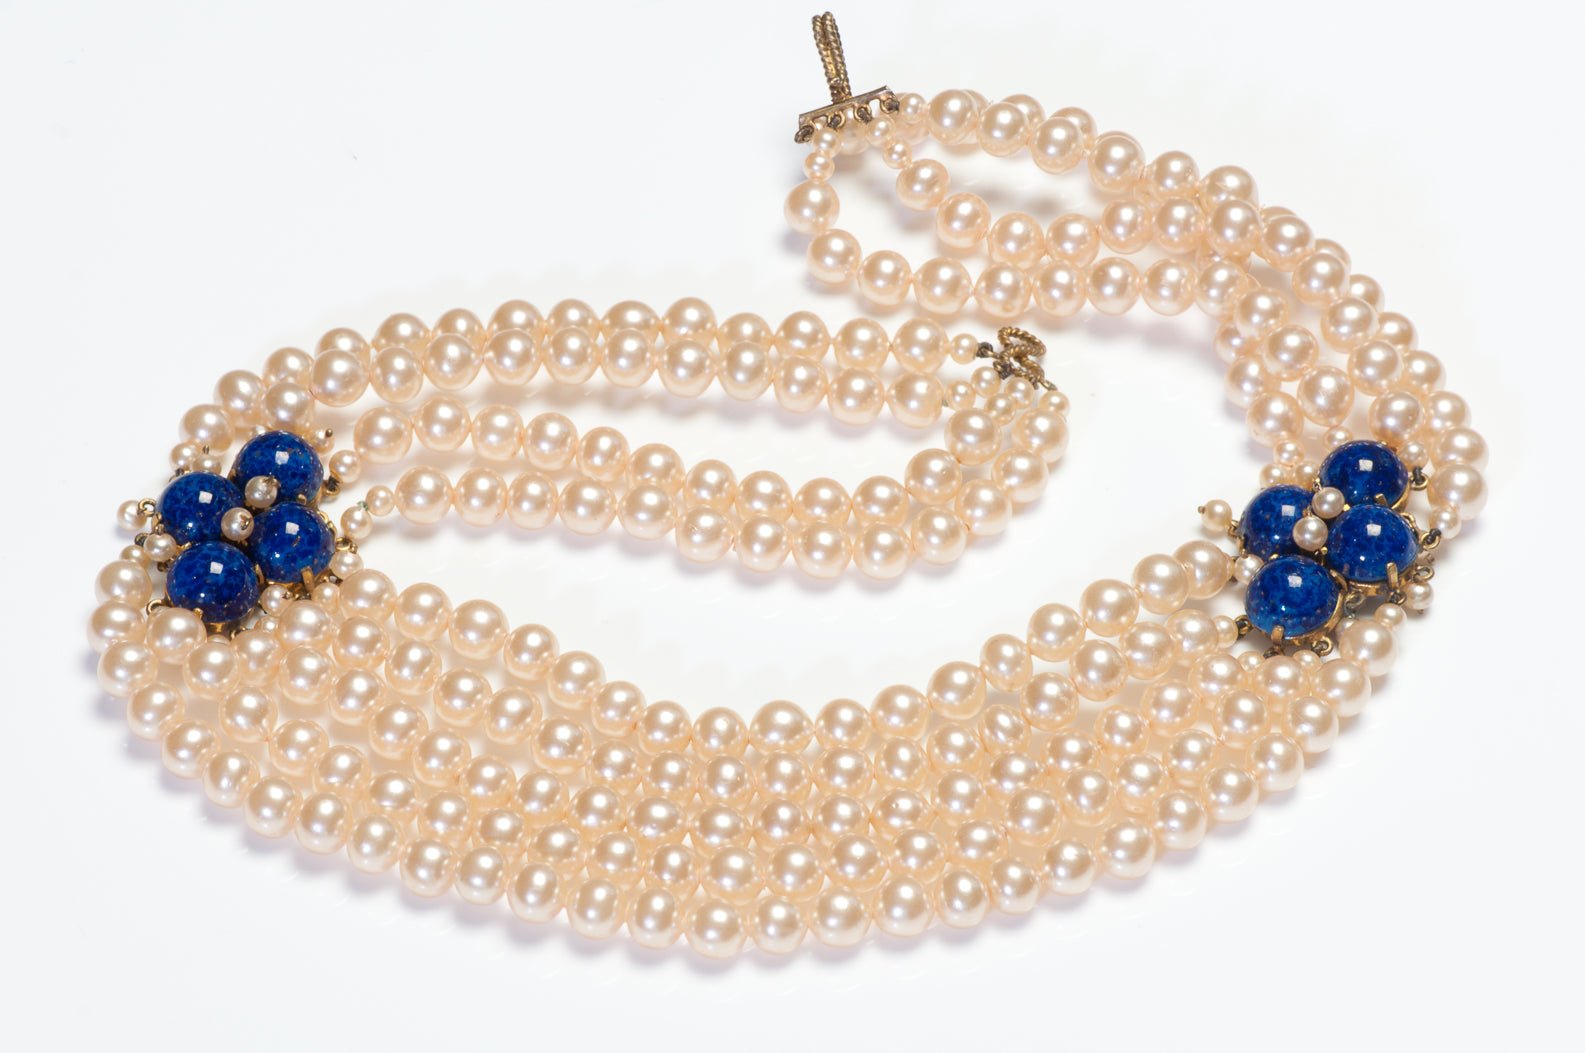 Christian Dior Paris Couture 1950's Blue Cabochon Glass Pearl Collar Necklace